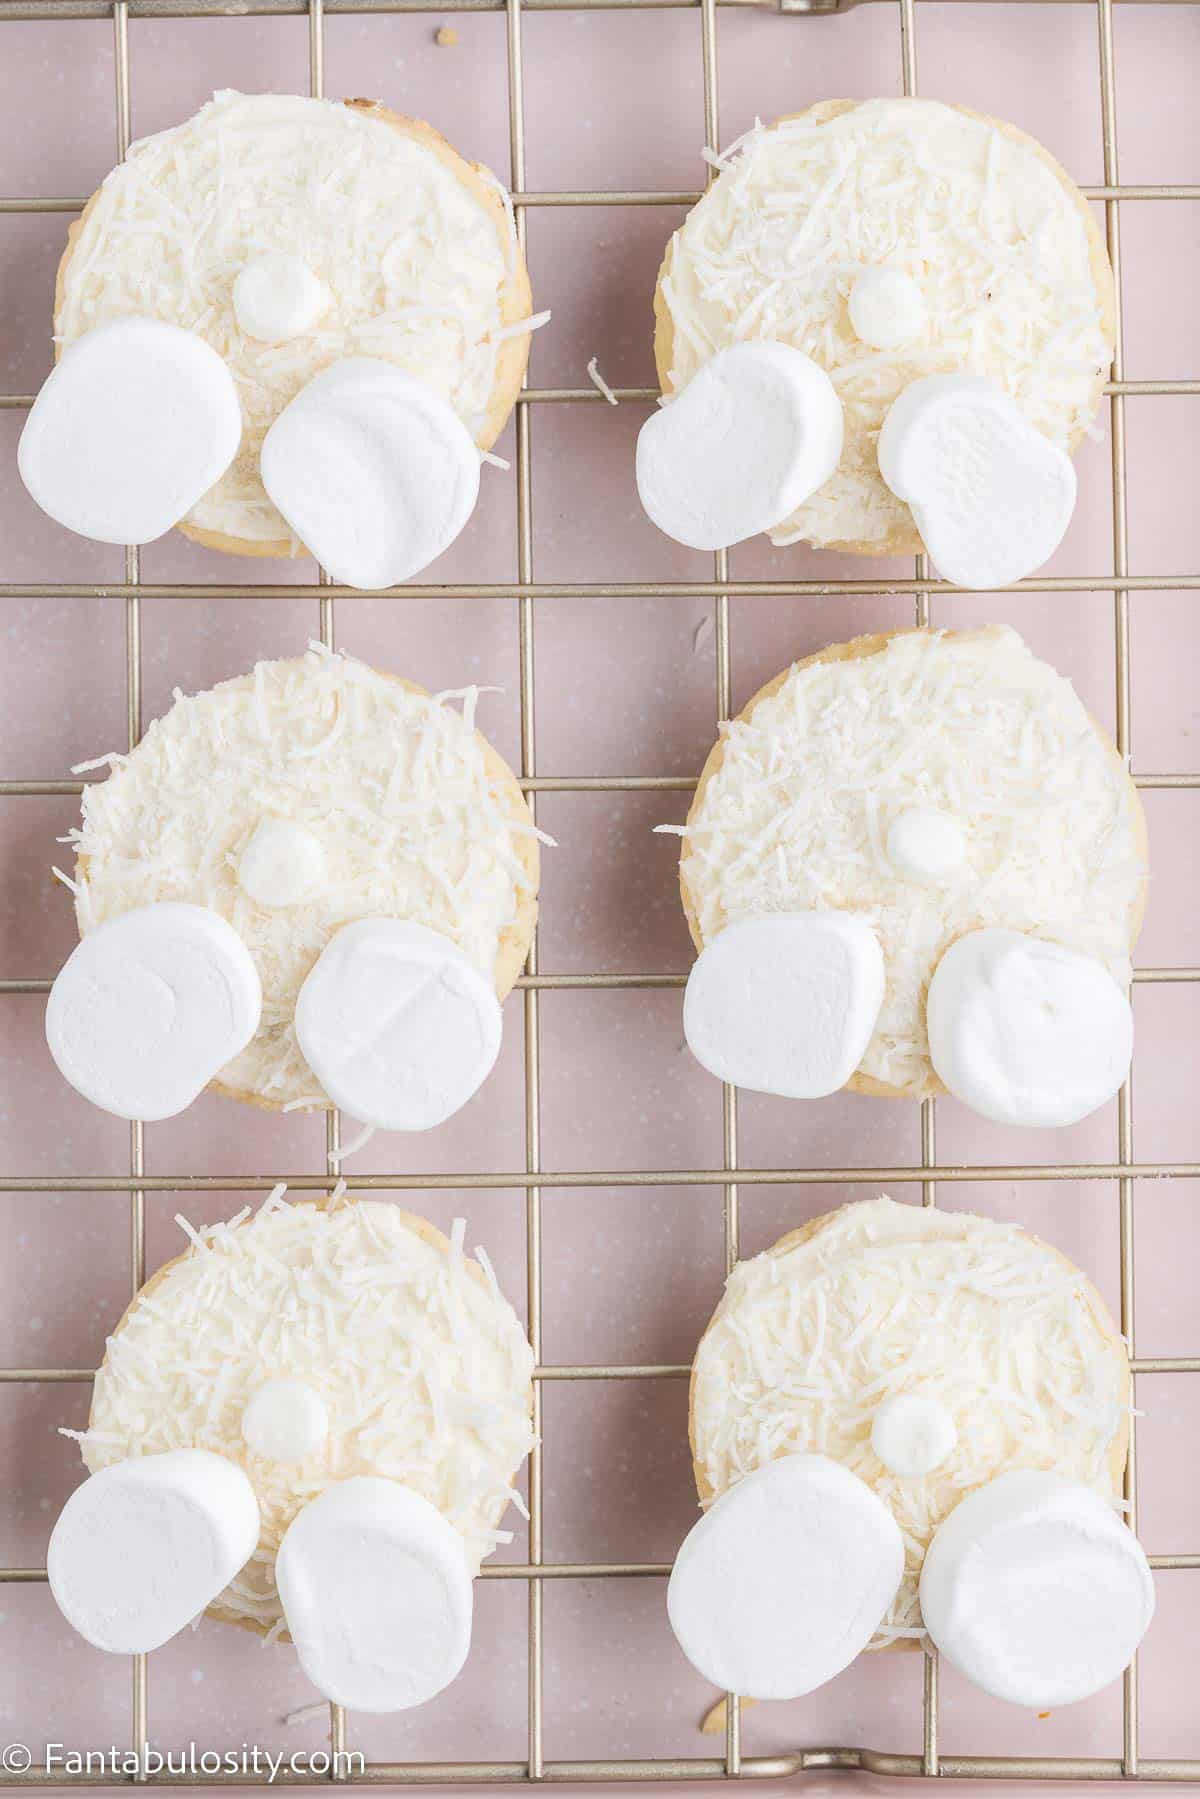 Large marshmallows as "feet" on the bunny butt cookies.